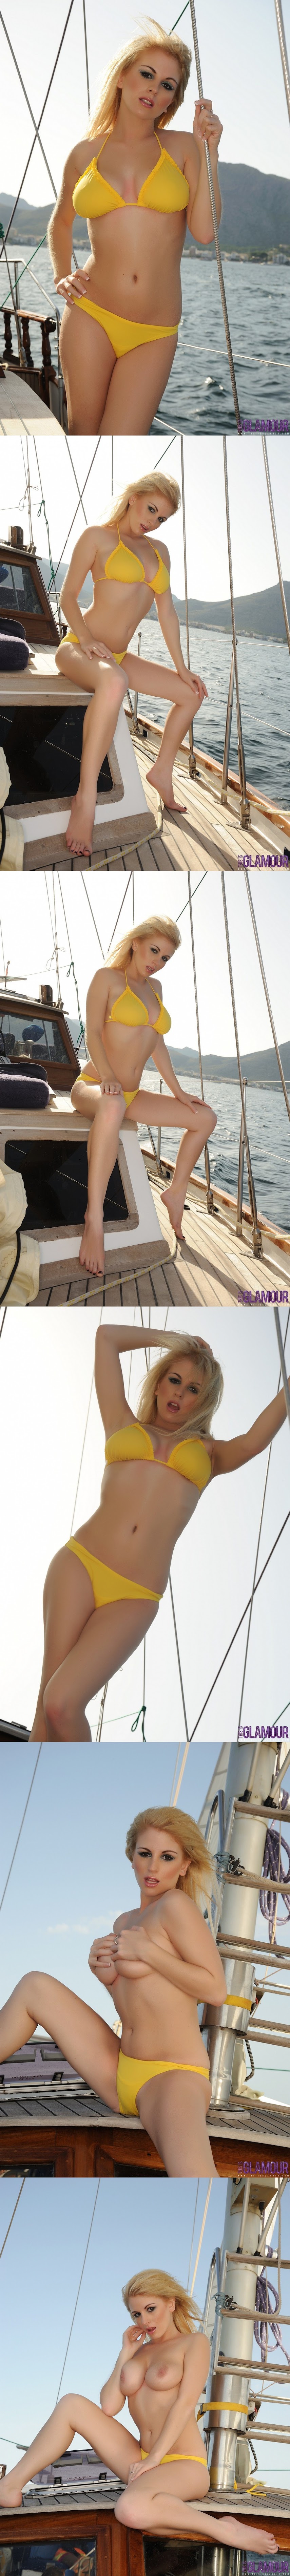 Zoe Stollery Sets Sail In A Canary Yellow BikiniReal Street Angels